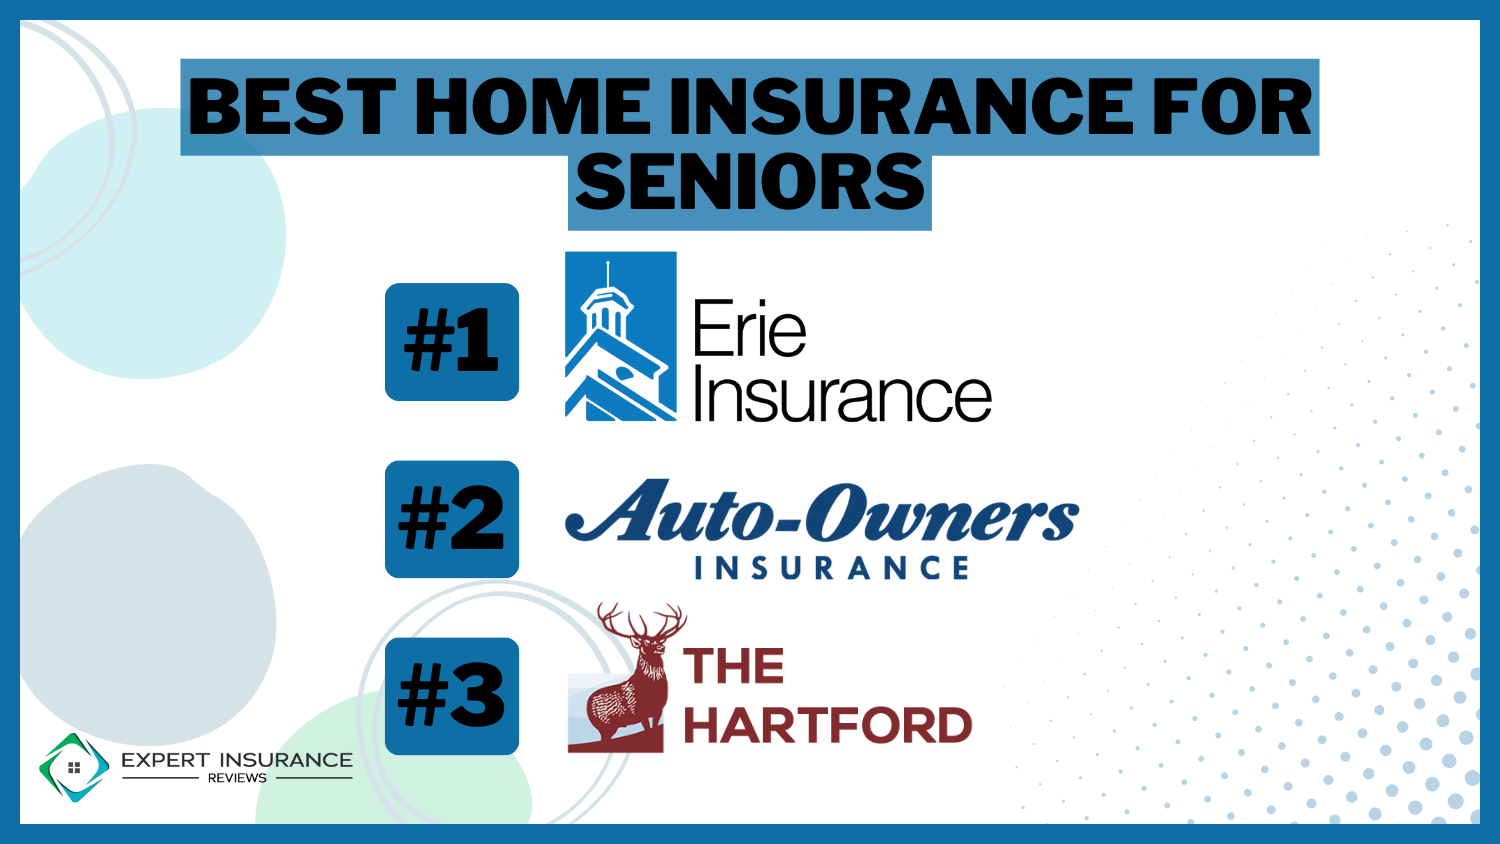 Best Home Insurance for Seniors: Erie, Auto-Owners, and The Hartford